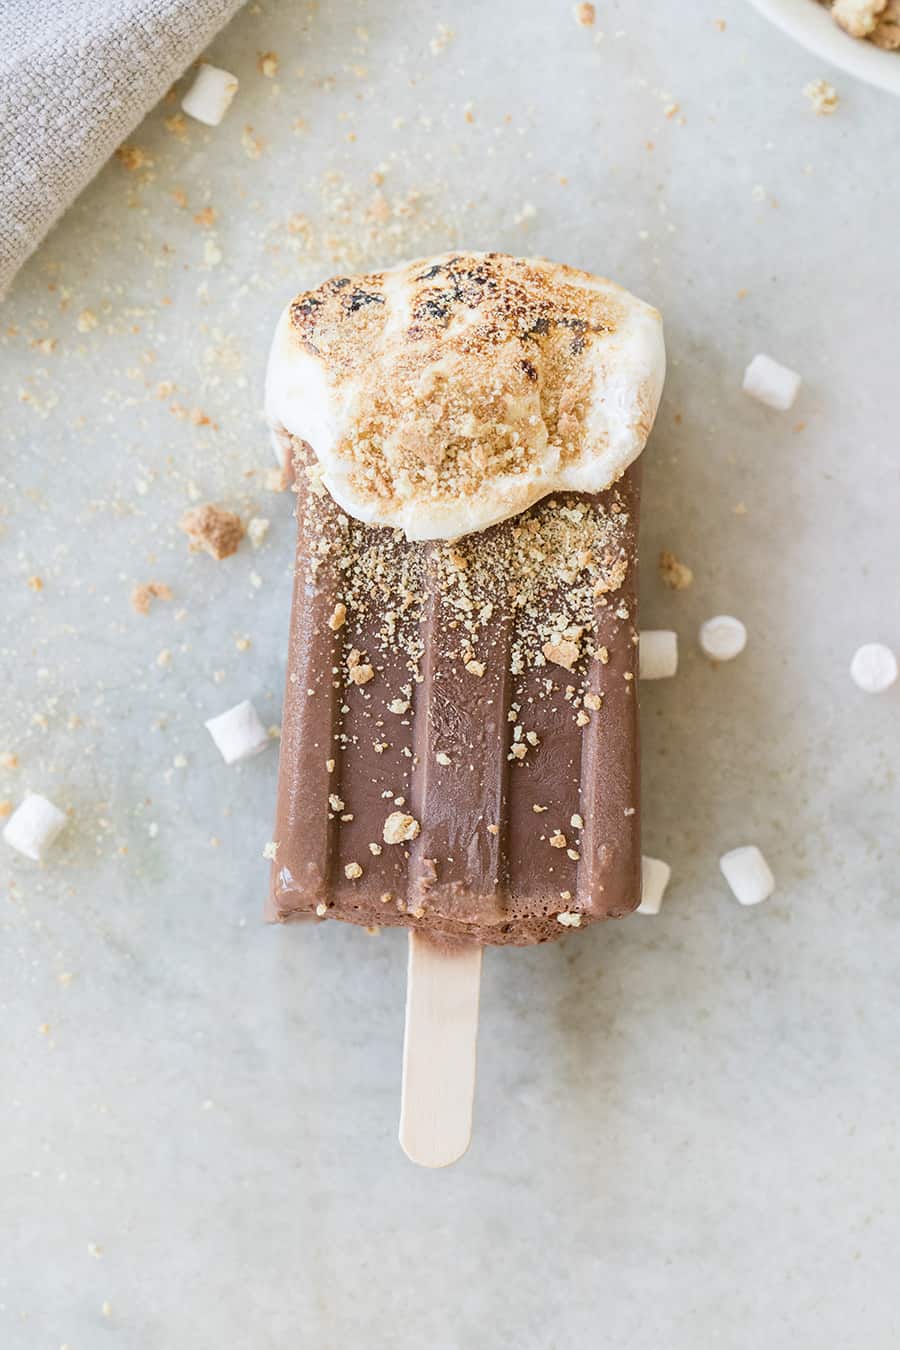 Chocolate Fudge Popsicle Recipe with Marshmallow Fluff for S'mores Popsicle